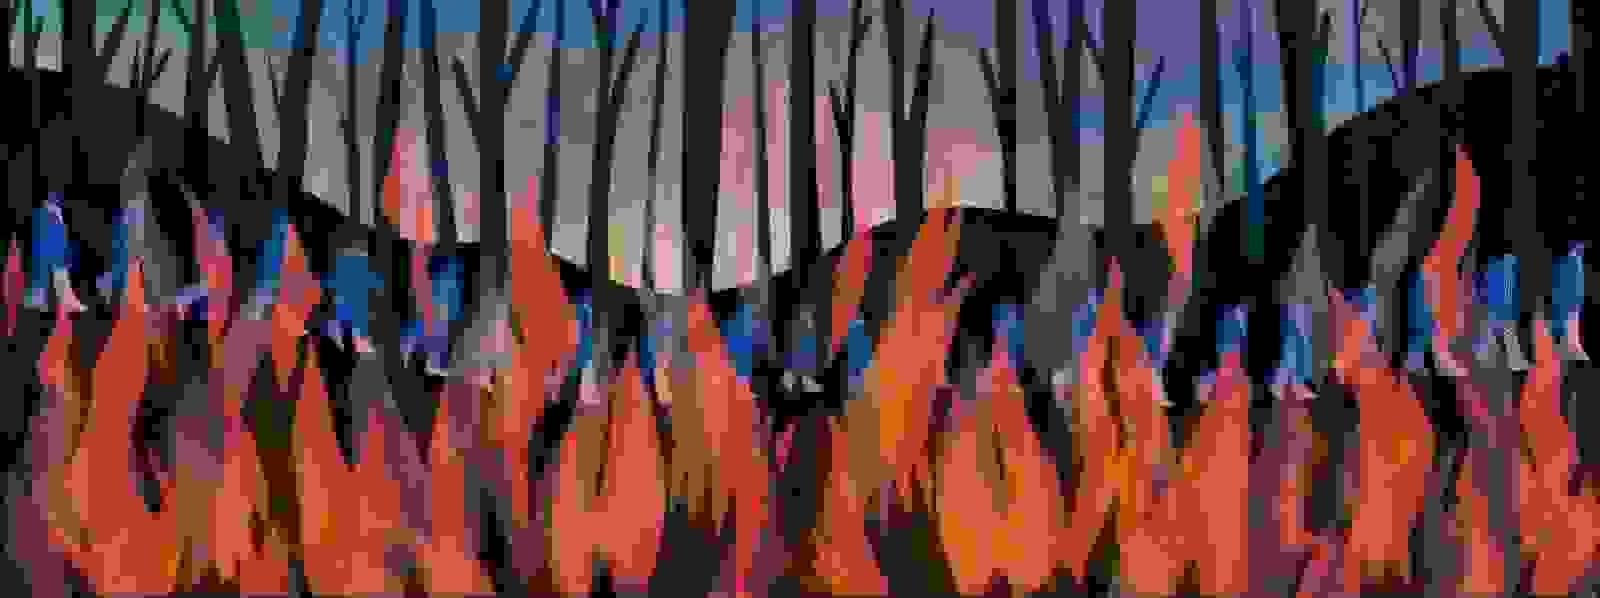 A group of human figures is walking. In the background blue color define the hills and road. Different shapes in yellow, orange, and red color define the fire.